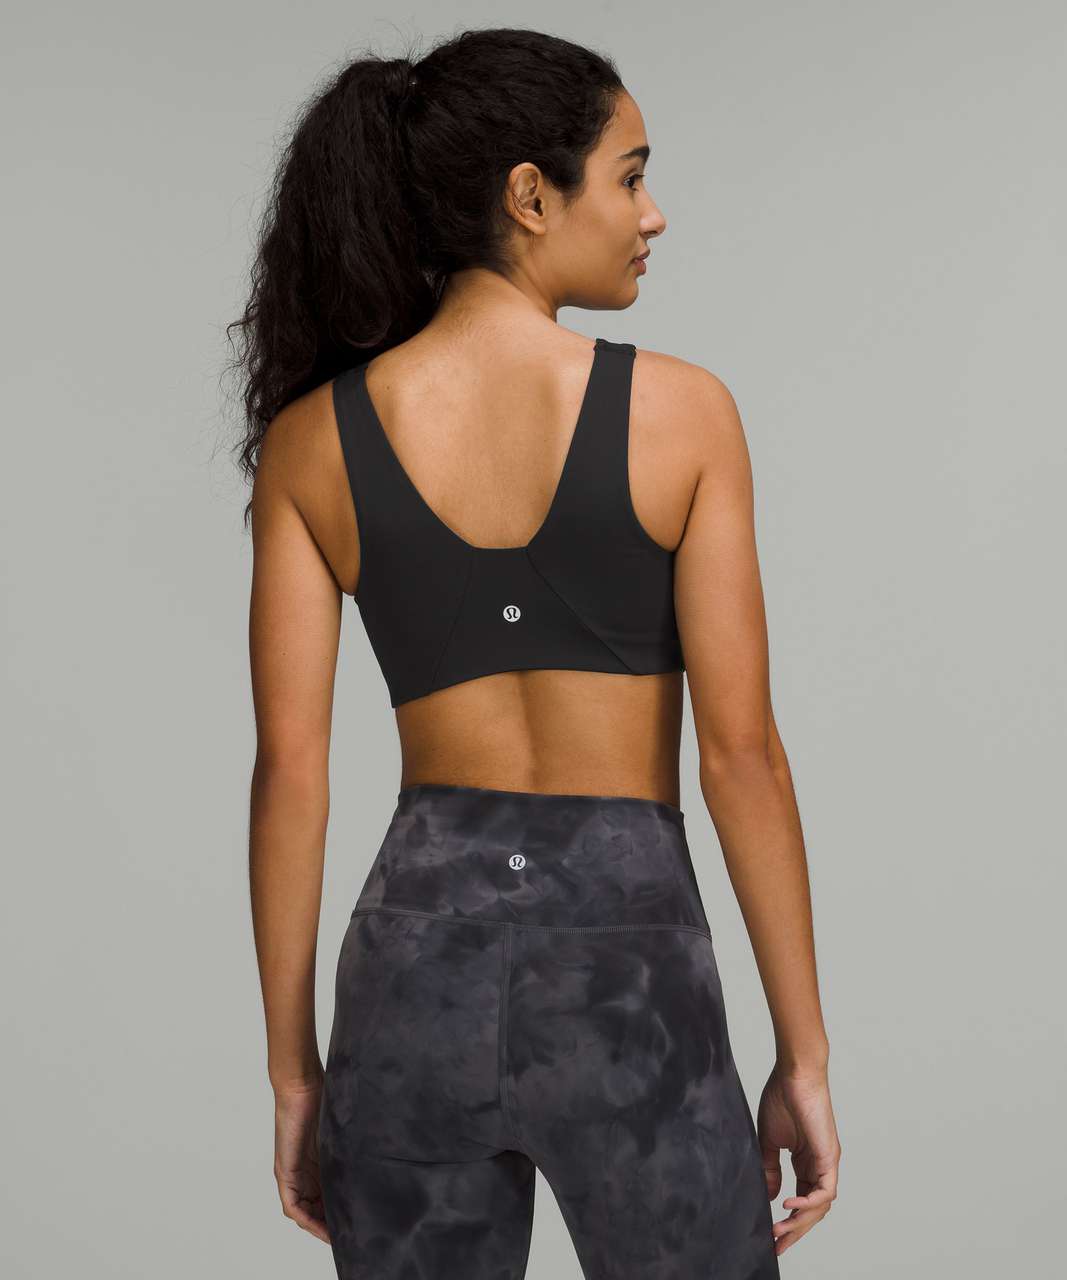 Lululemon Ribbed Train Bra Black Size XS - $48 (17% Off Retail) New With  Tags - From PrelovedbyJazi